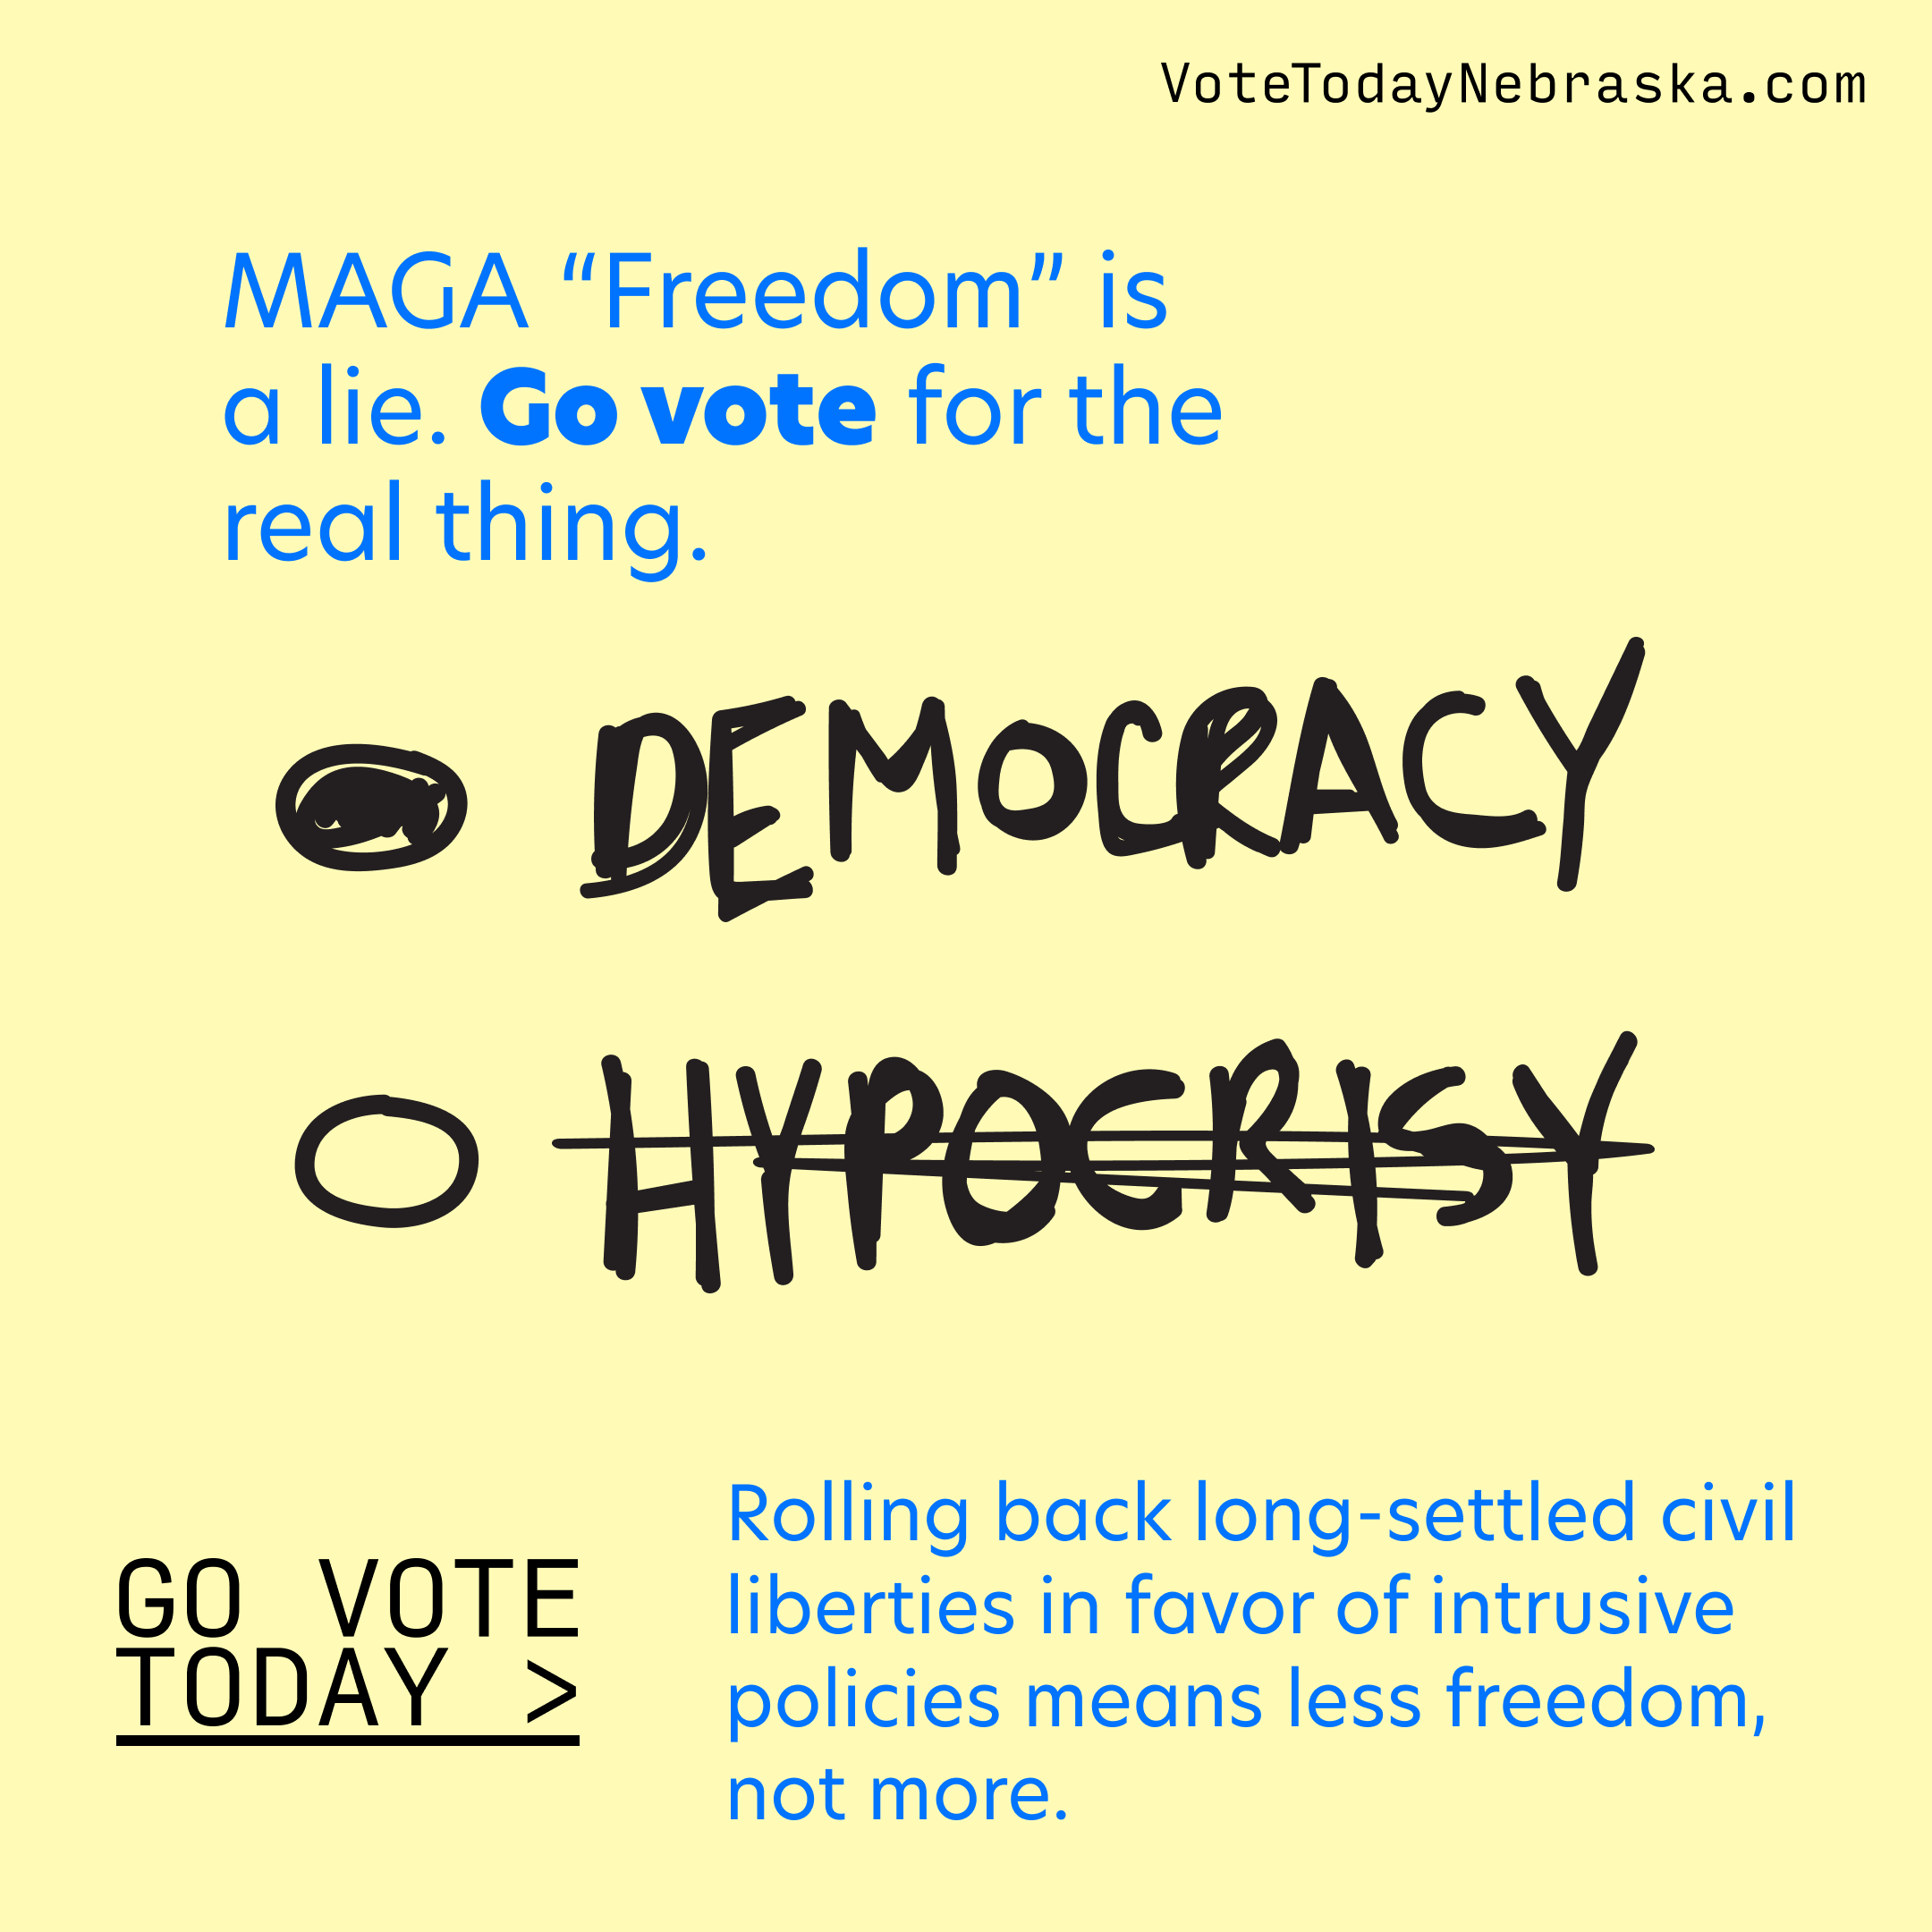 Drawing of a vote for Democracy, Hypocrisy is crossed out. Republican "Freedom" is a lie. Go vote for the real thing. Rolling back long-settled civil liberties in favor of intrusive policies means less freedom, not more. Go Vote Today >